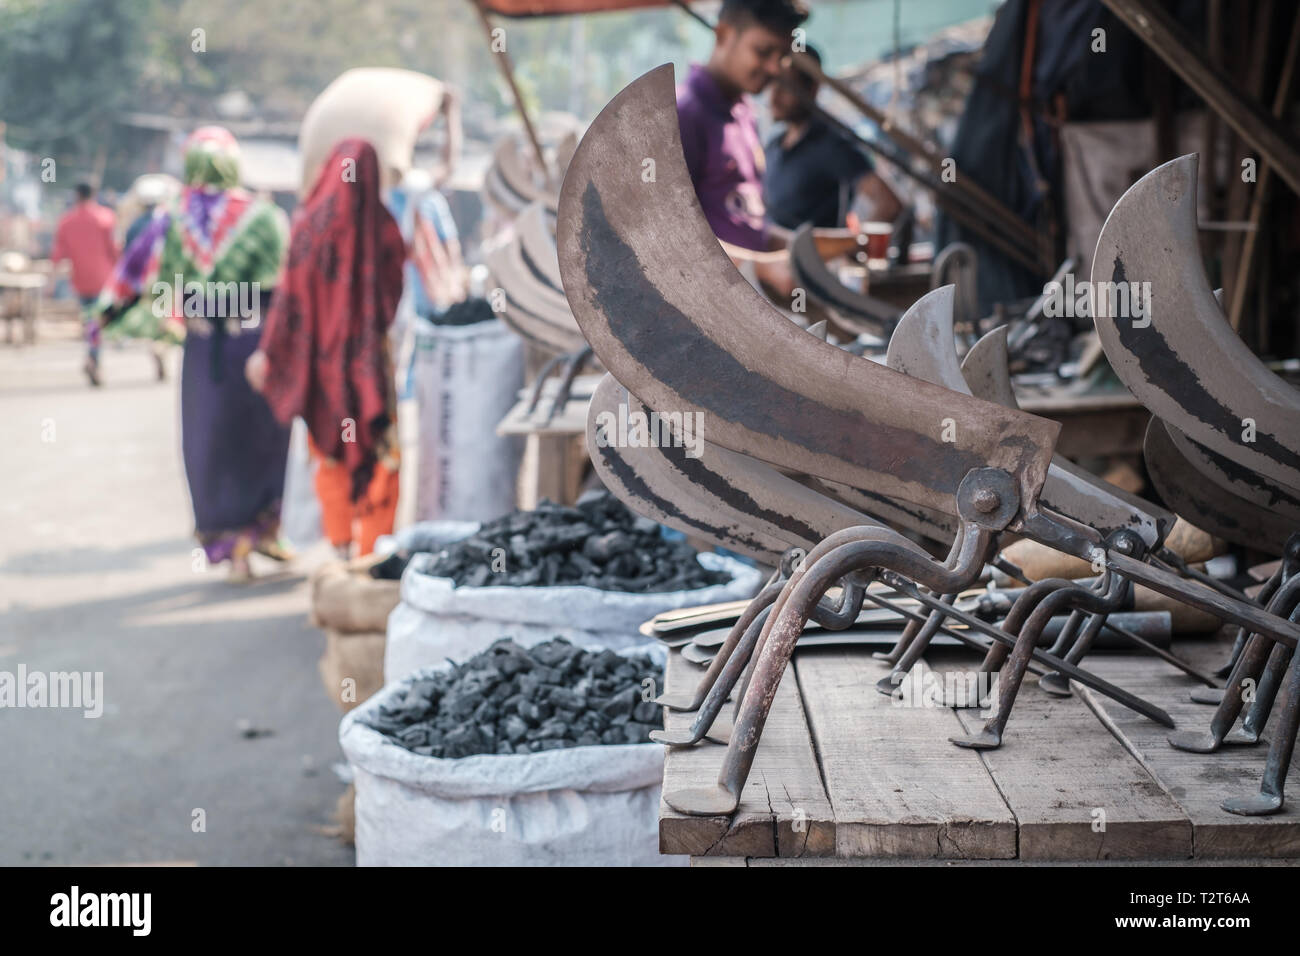 Metal tools on display in the workshop on the local market in Dhaka, Bangladesh. 2 unrecognizable muslim women in the background. Stock Photo